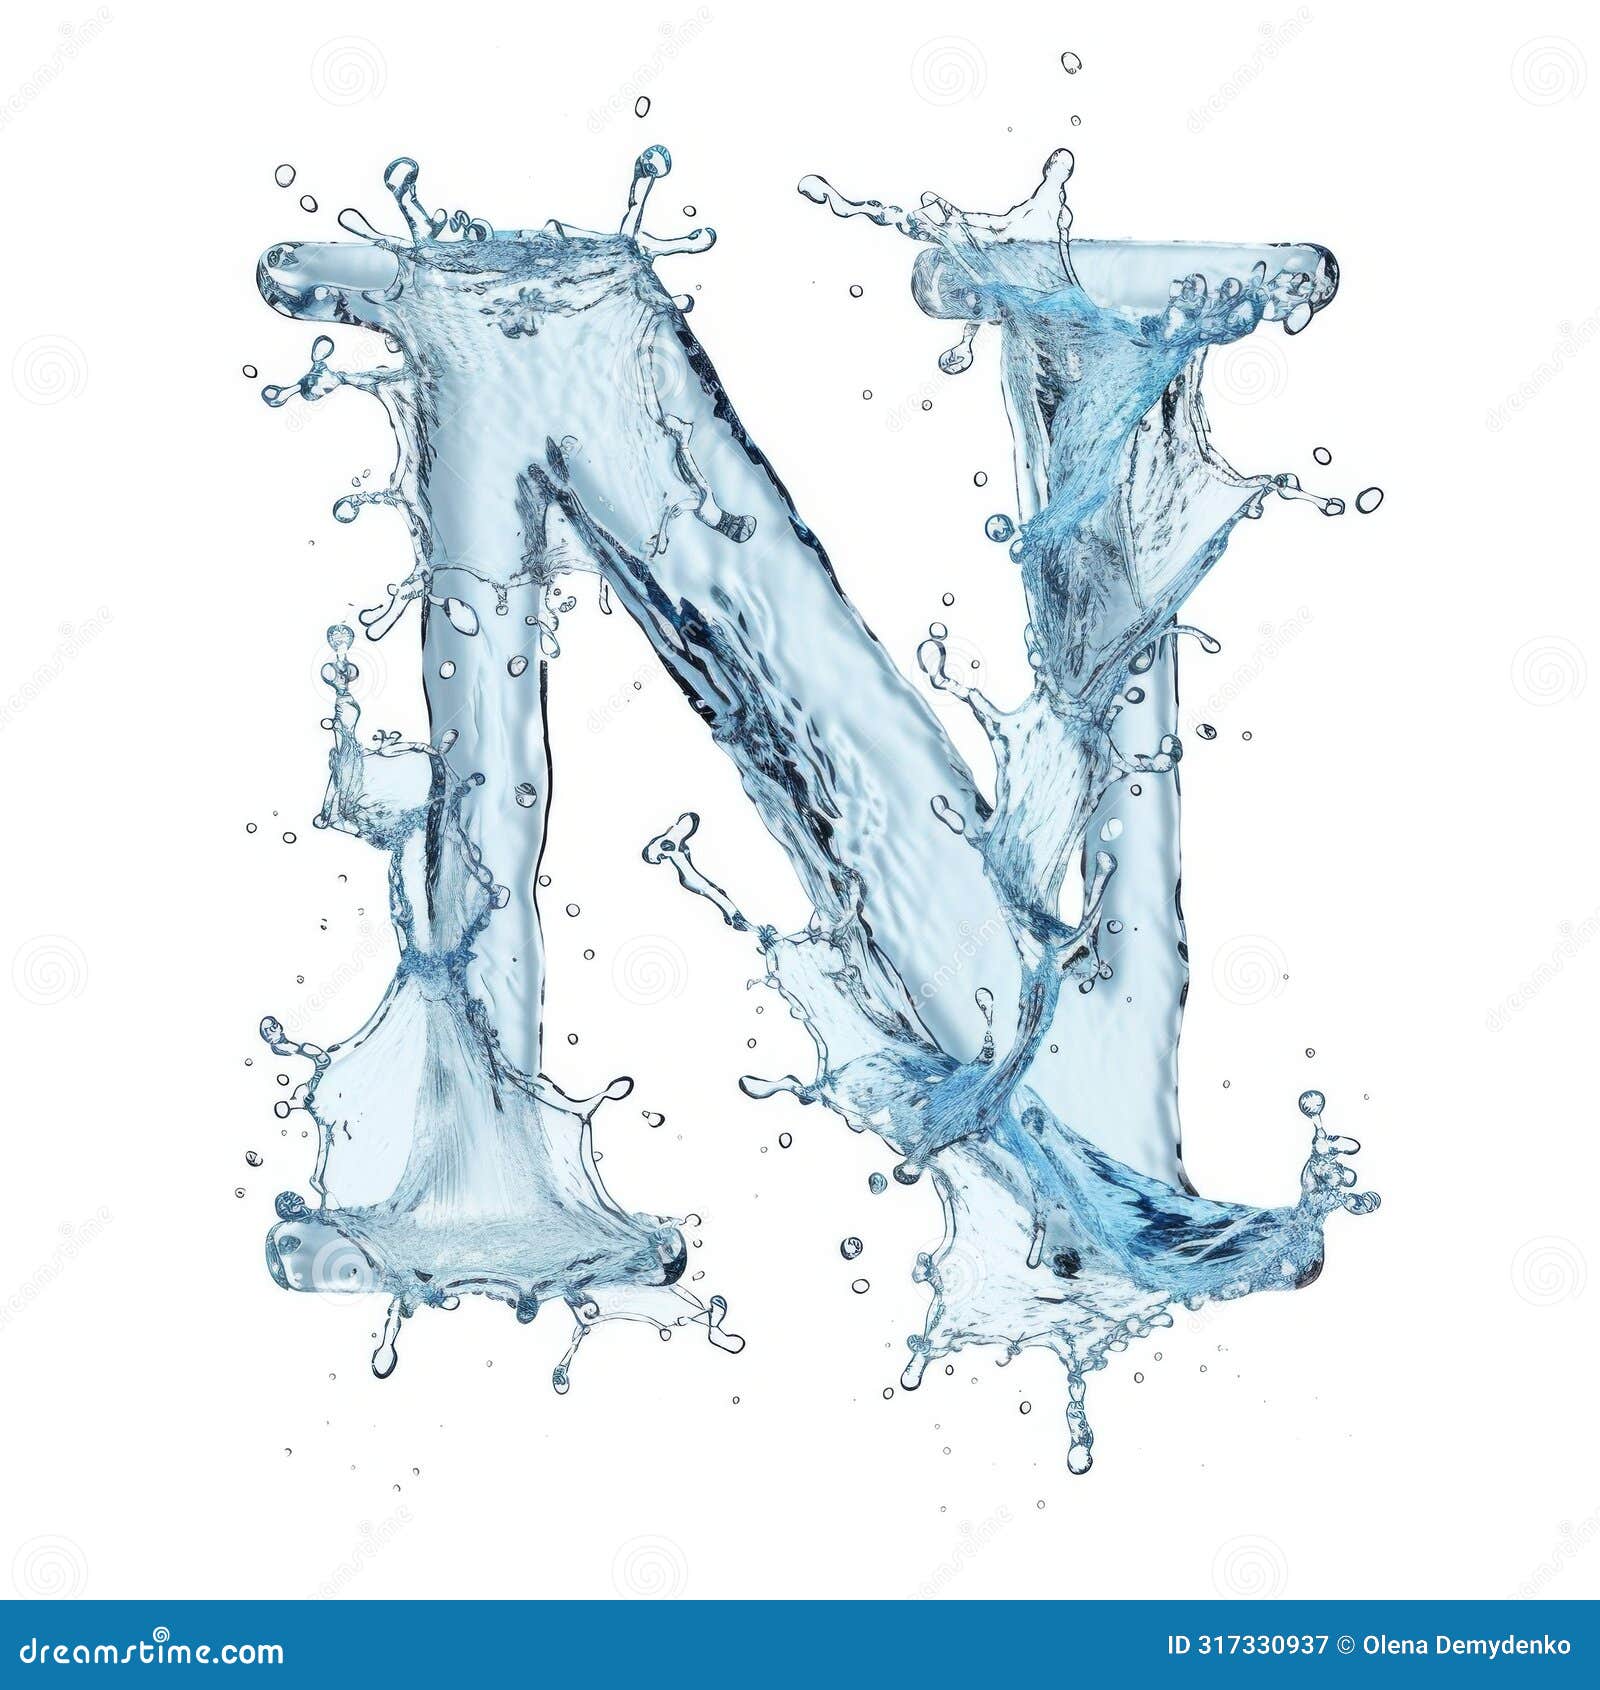 splash of water takes the  of the letter n, representing the concept of fluid typography.